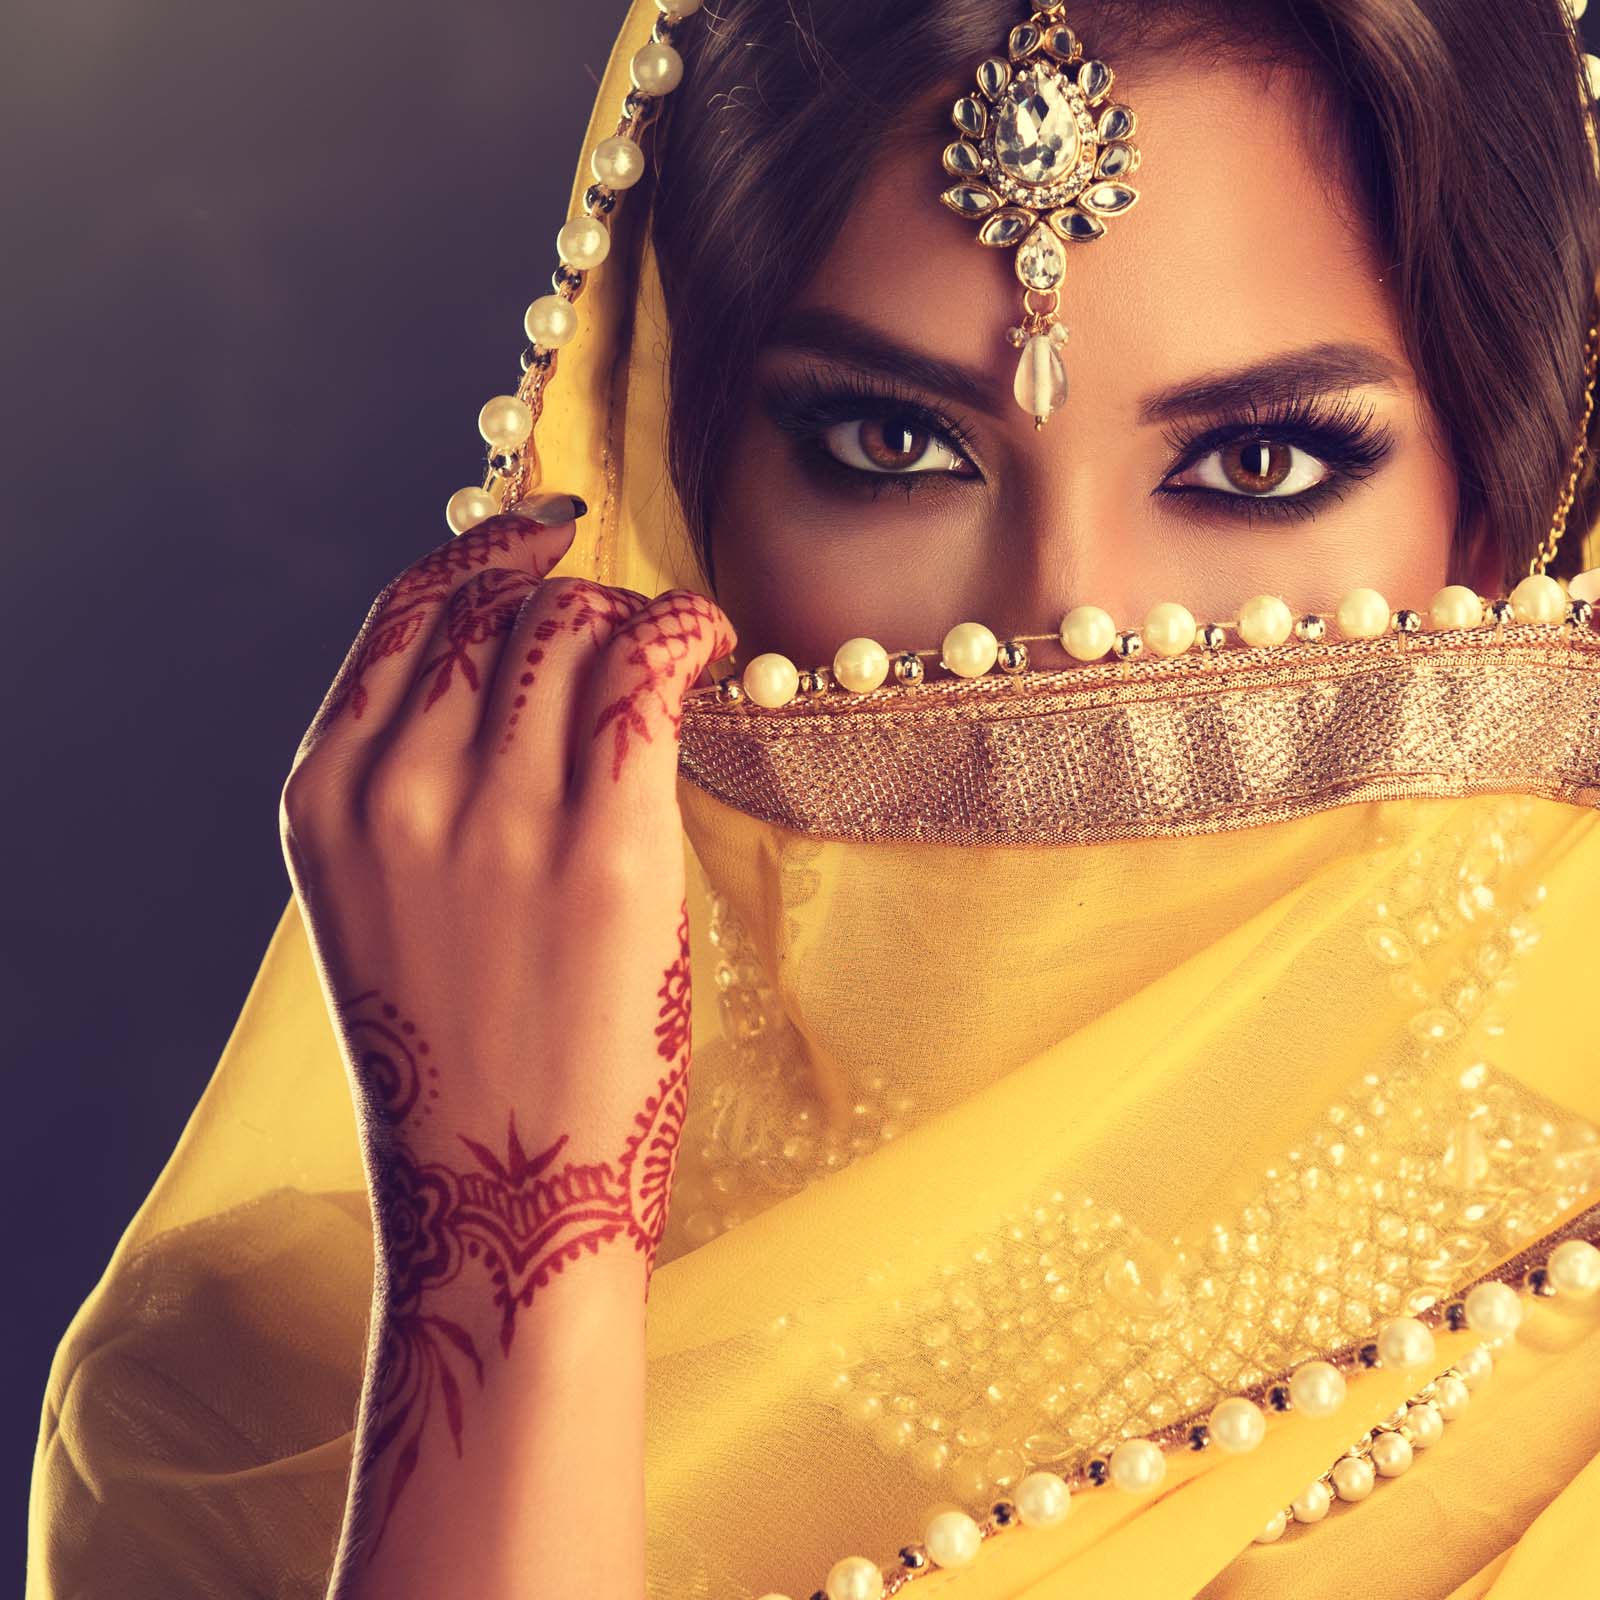 Indian Women More Bullish On Crypto than Men, Invest Twice As Much